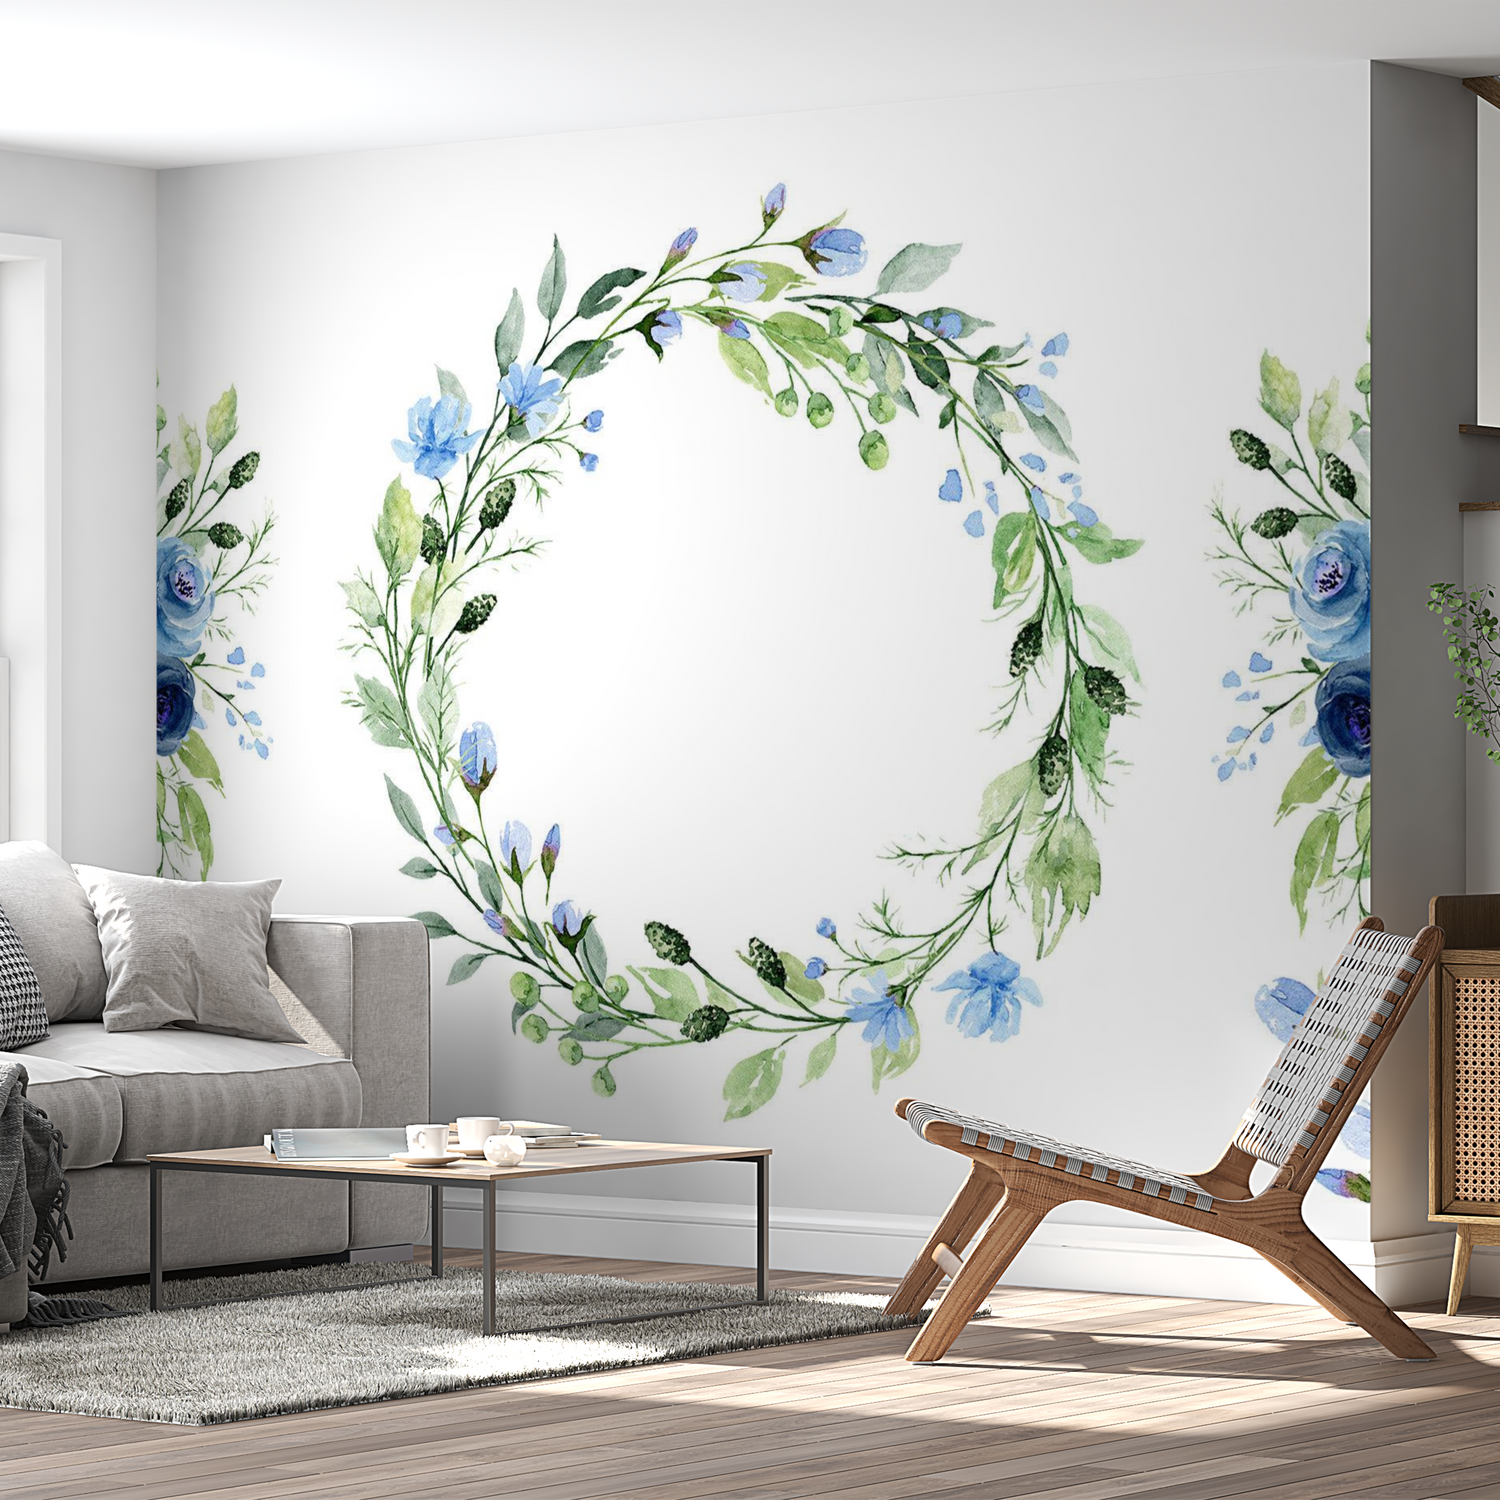 Peel & Stick Floral Wall Mural - Romantic Wreath - Removable Wallpaper 38"Wx27"H